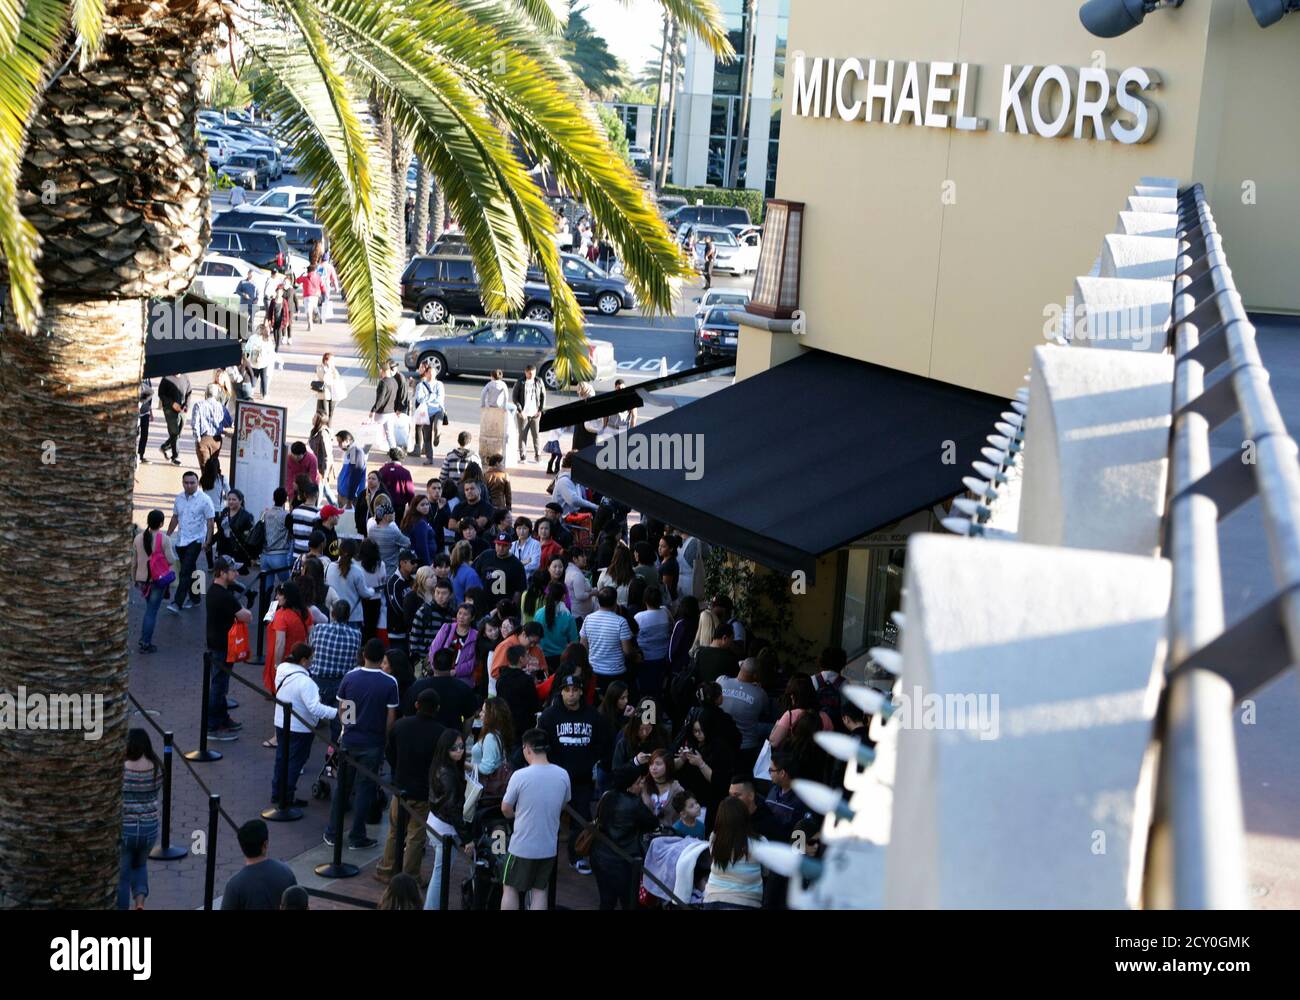 line to enter a Michael Kors store 